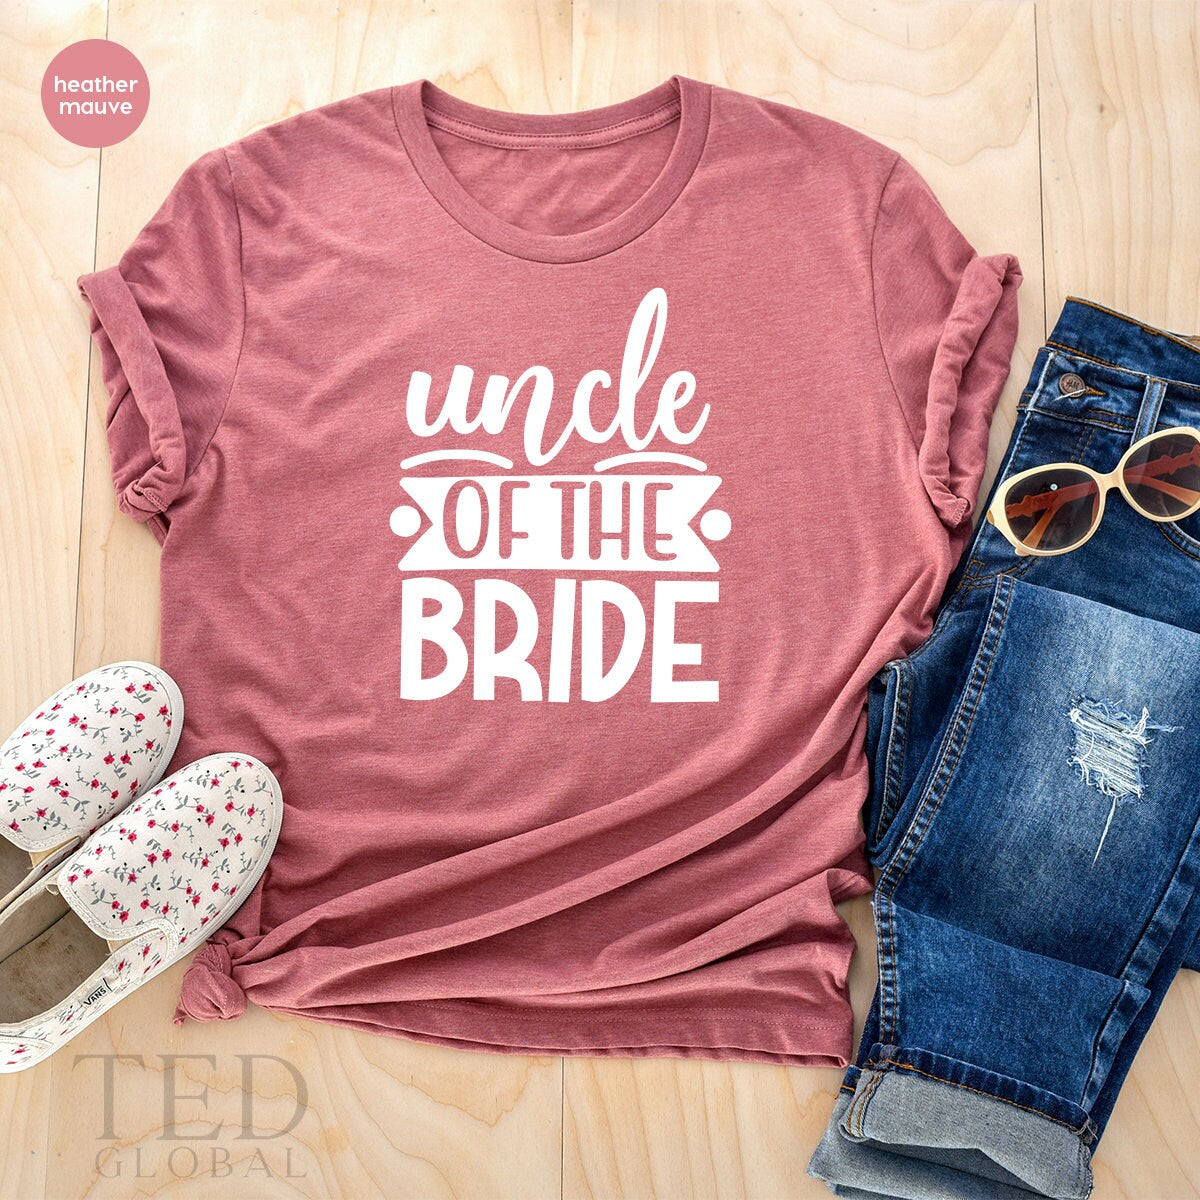 Uncle Of The Bride Shirt, Uncle Gift, Bride Family T-Shirt, Bride Team Shirt, Bachelorette T Shirt, Bachelor Shirt, Wedding Party TShirt - Fastdeliverytees.com